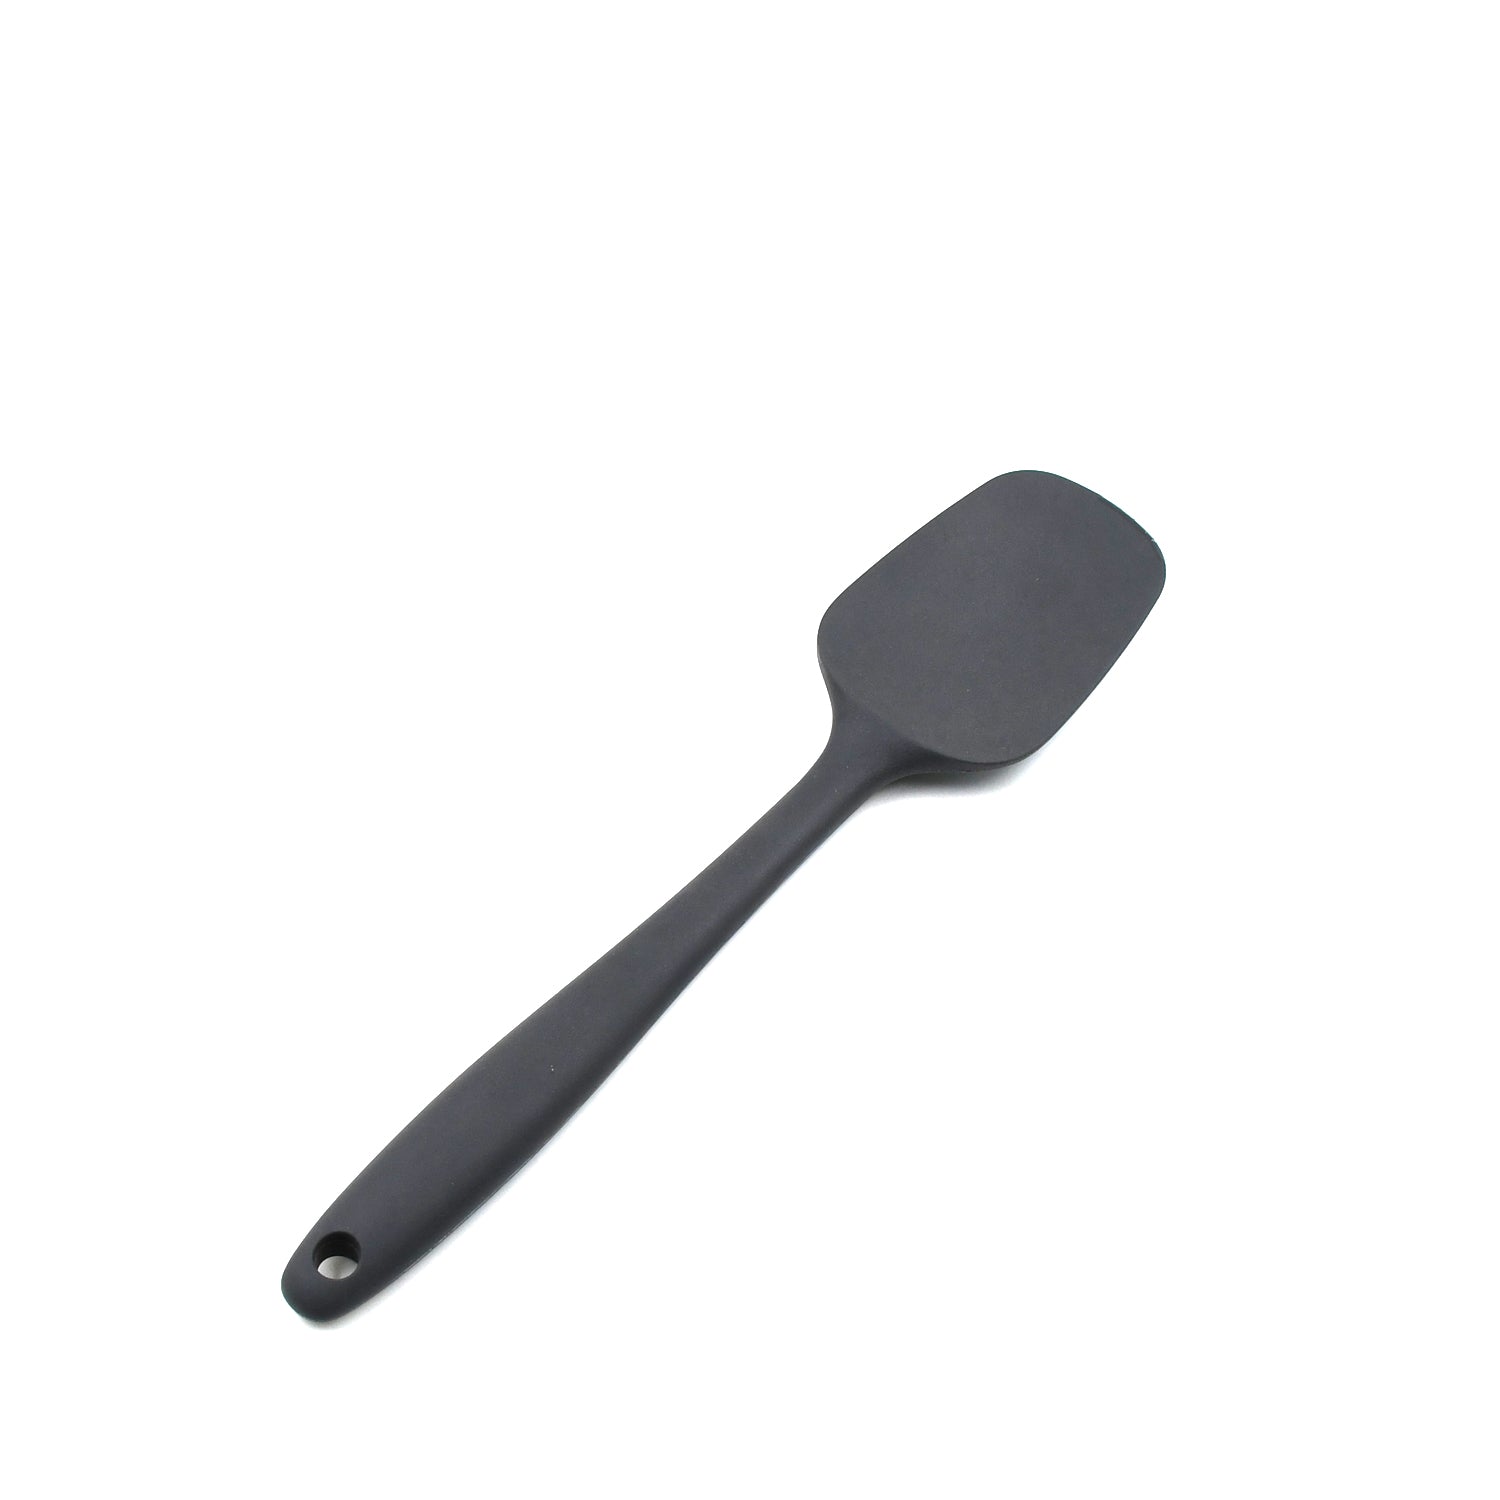 Silicone Spoon Spatula - Non-Stick Rubber Spatula, Scooping and Scraping - Dishwasher Safe and High Heat Resistant (27 cm)